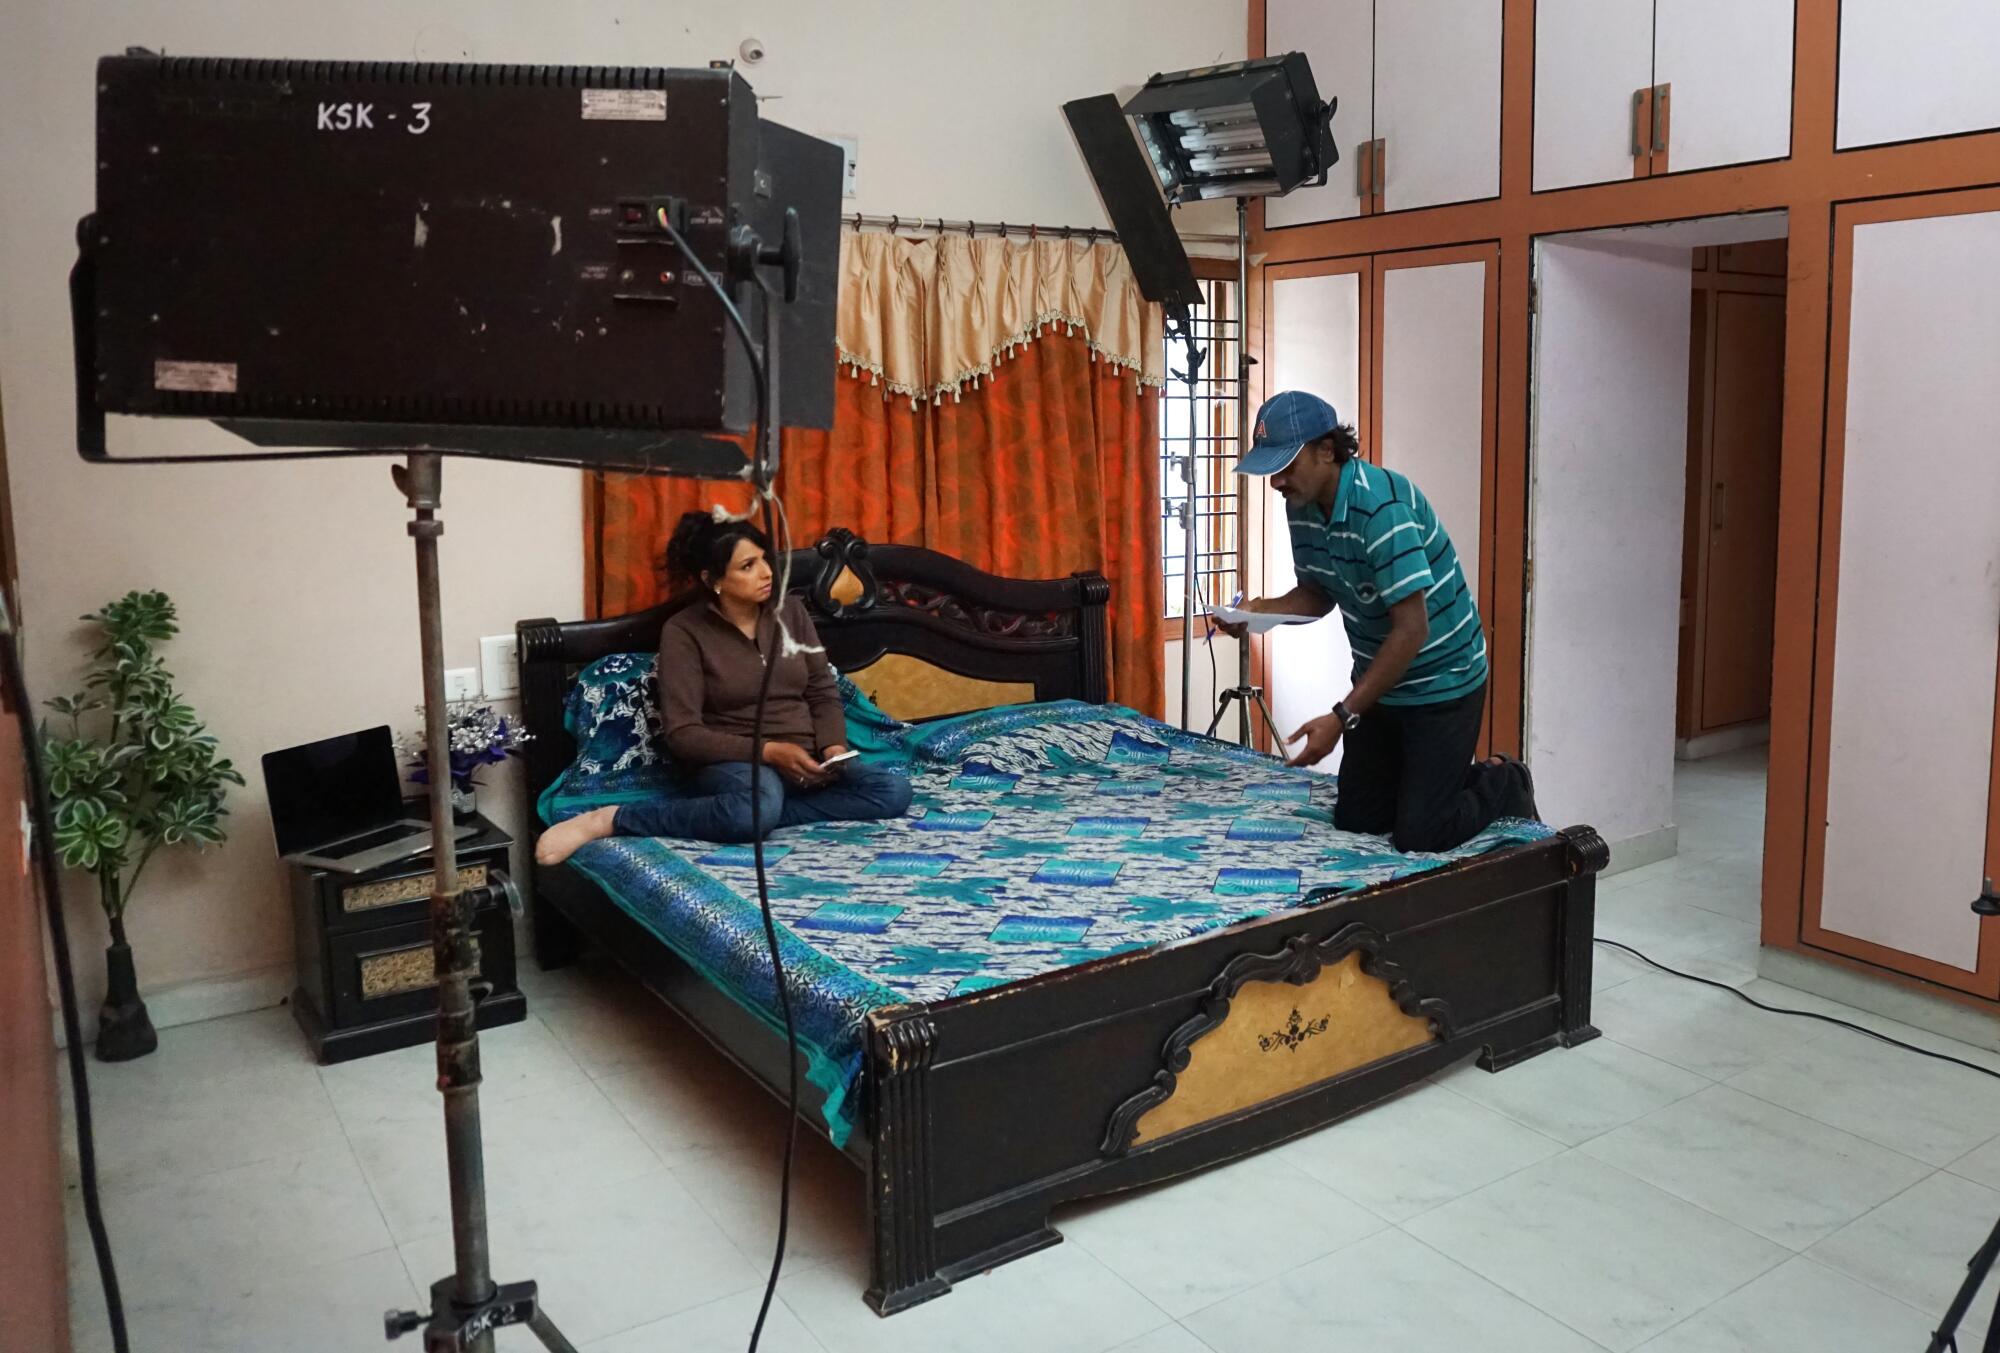 A woman sits on a bed, as a man stands nearby, with recording equipment in the room 